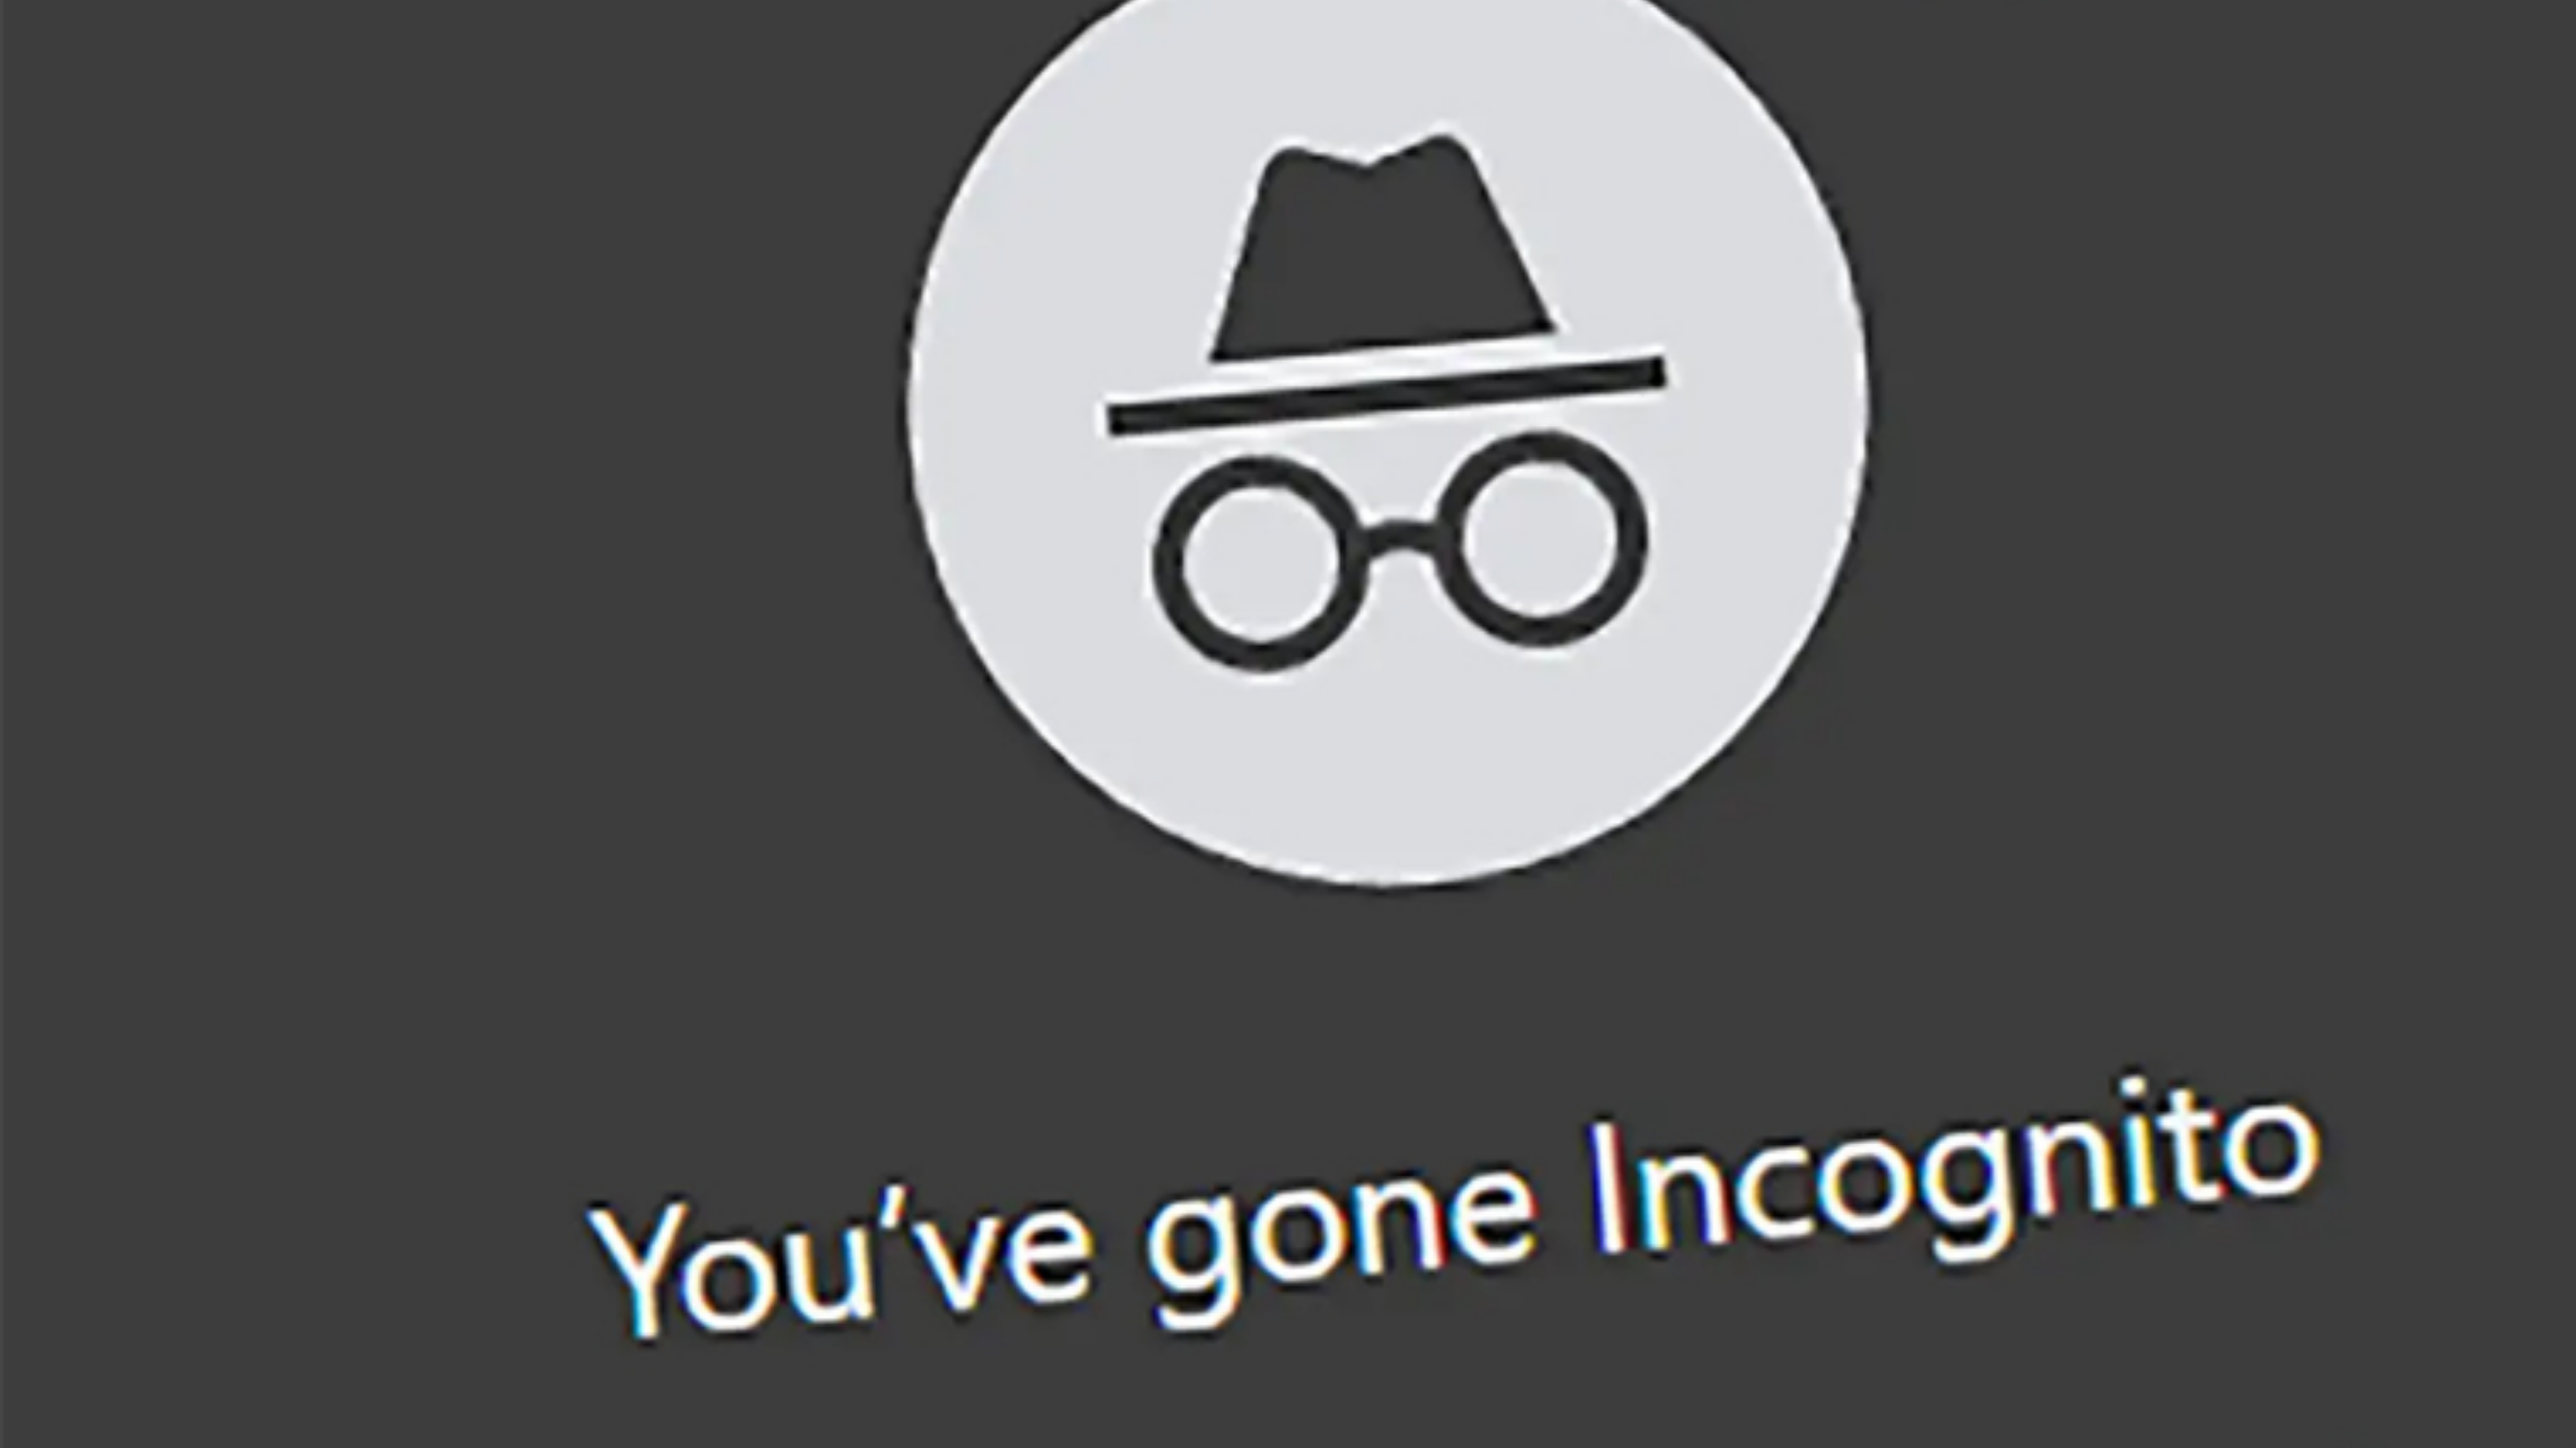 How safe is your privacy in the browser's incognito mode